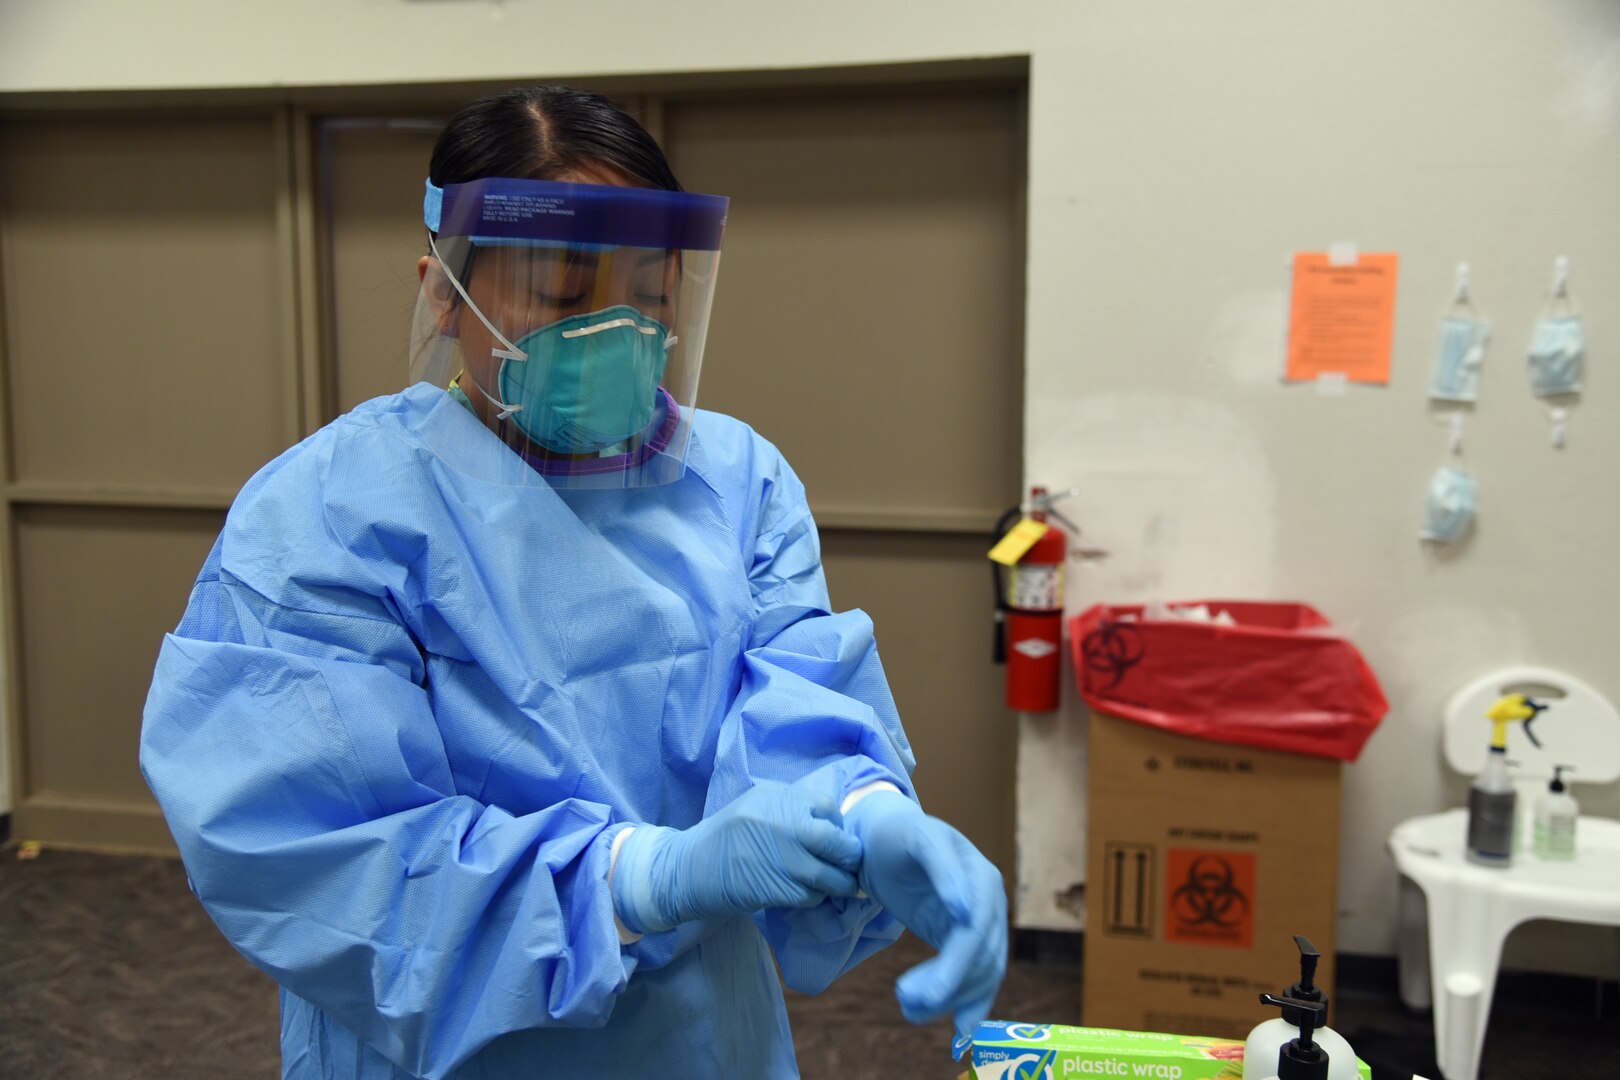 Spc. Paige Curtiss, 253rd Engineer Battalion, food service specialist, puts on personal protection equipment before entering a COVID-19 hot zone at an alternate care facility on the Navajo Nation in Chinle, Ariz., June 2, 2020.